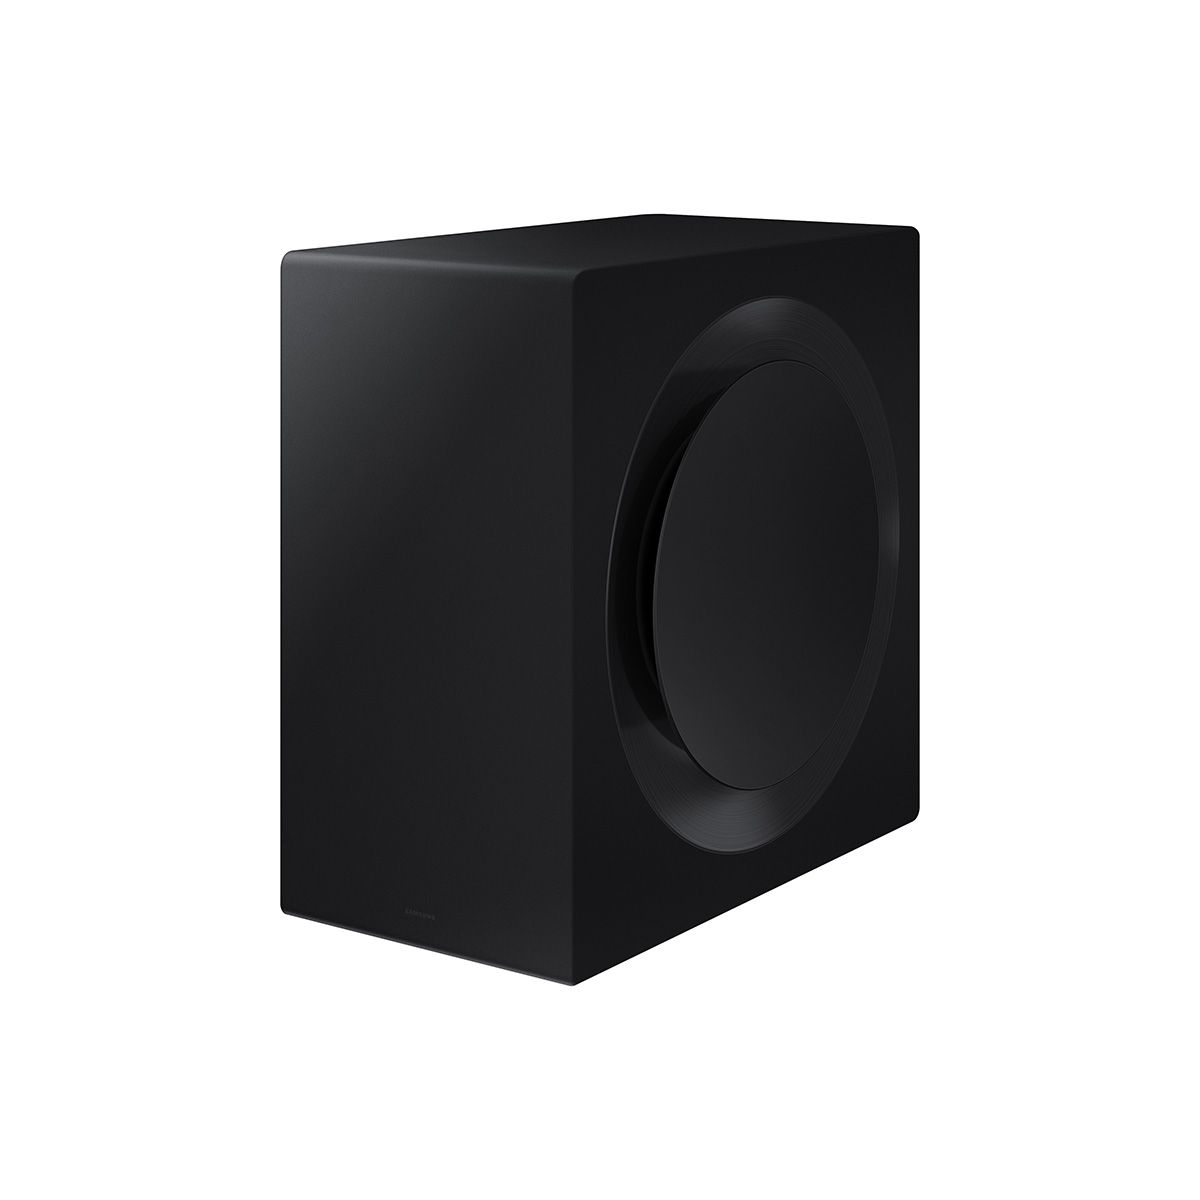 Samsung Q990C 11.1.4 ch. Subwoofer - angled front view